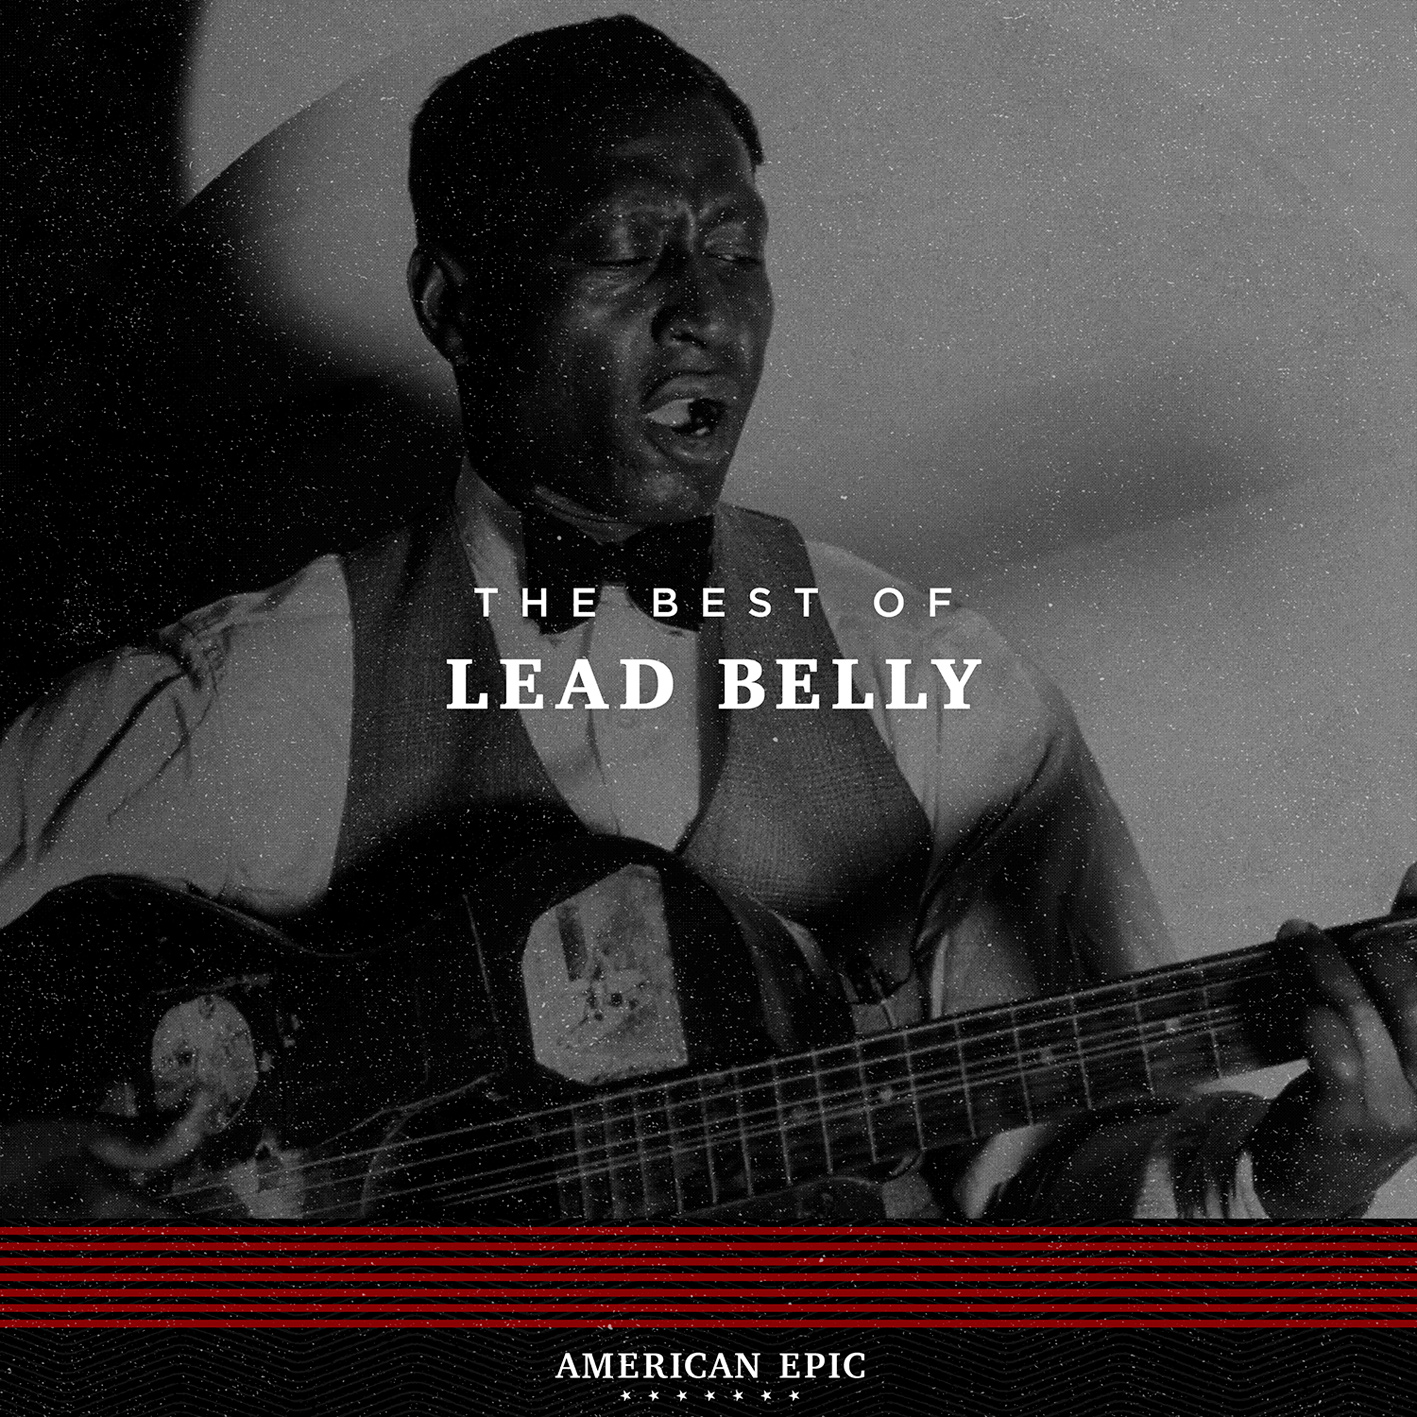 Lead Belly – American Epic: The Best Of Lead Belly (2017) [HDTracks FLAC 24bit/96kHz]